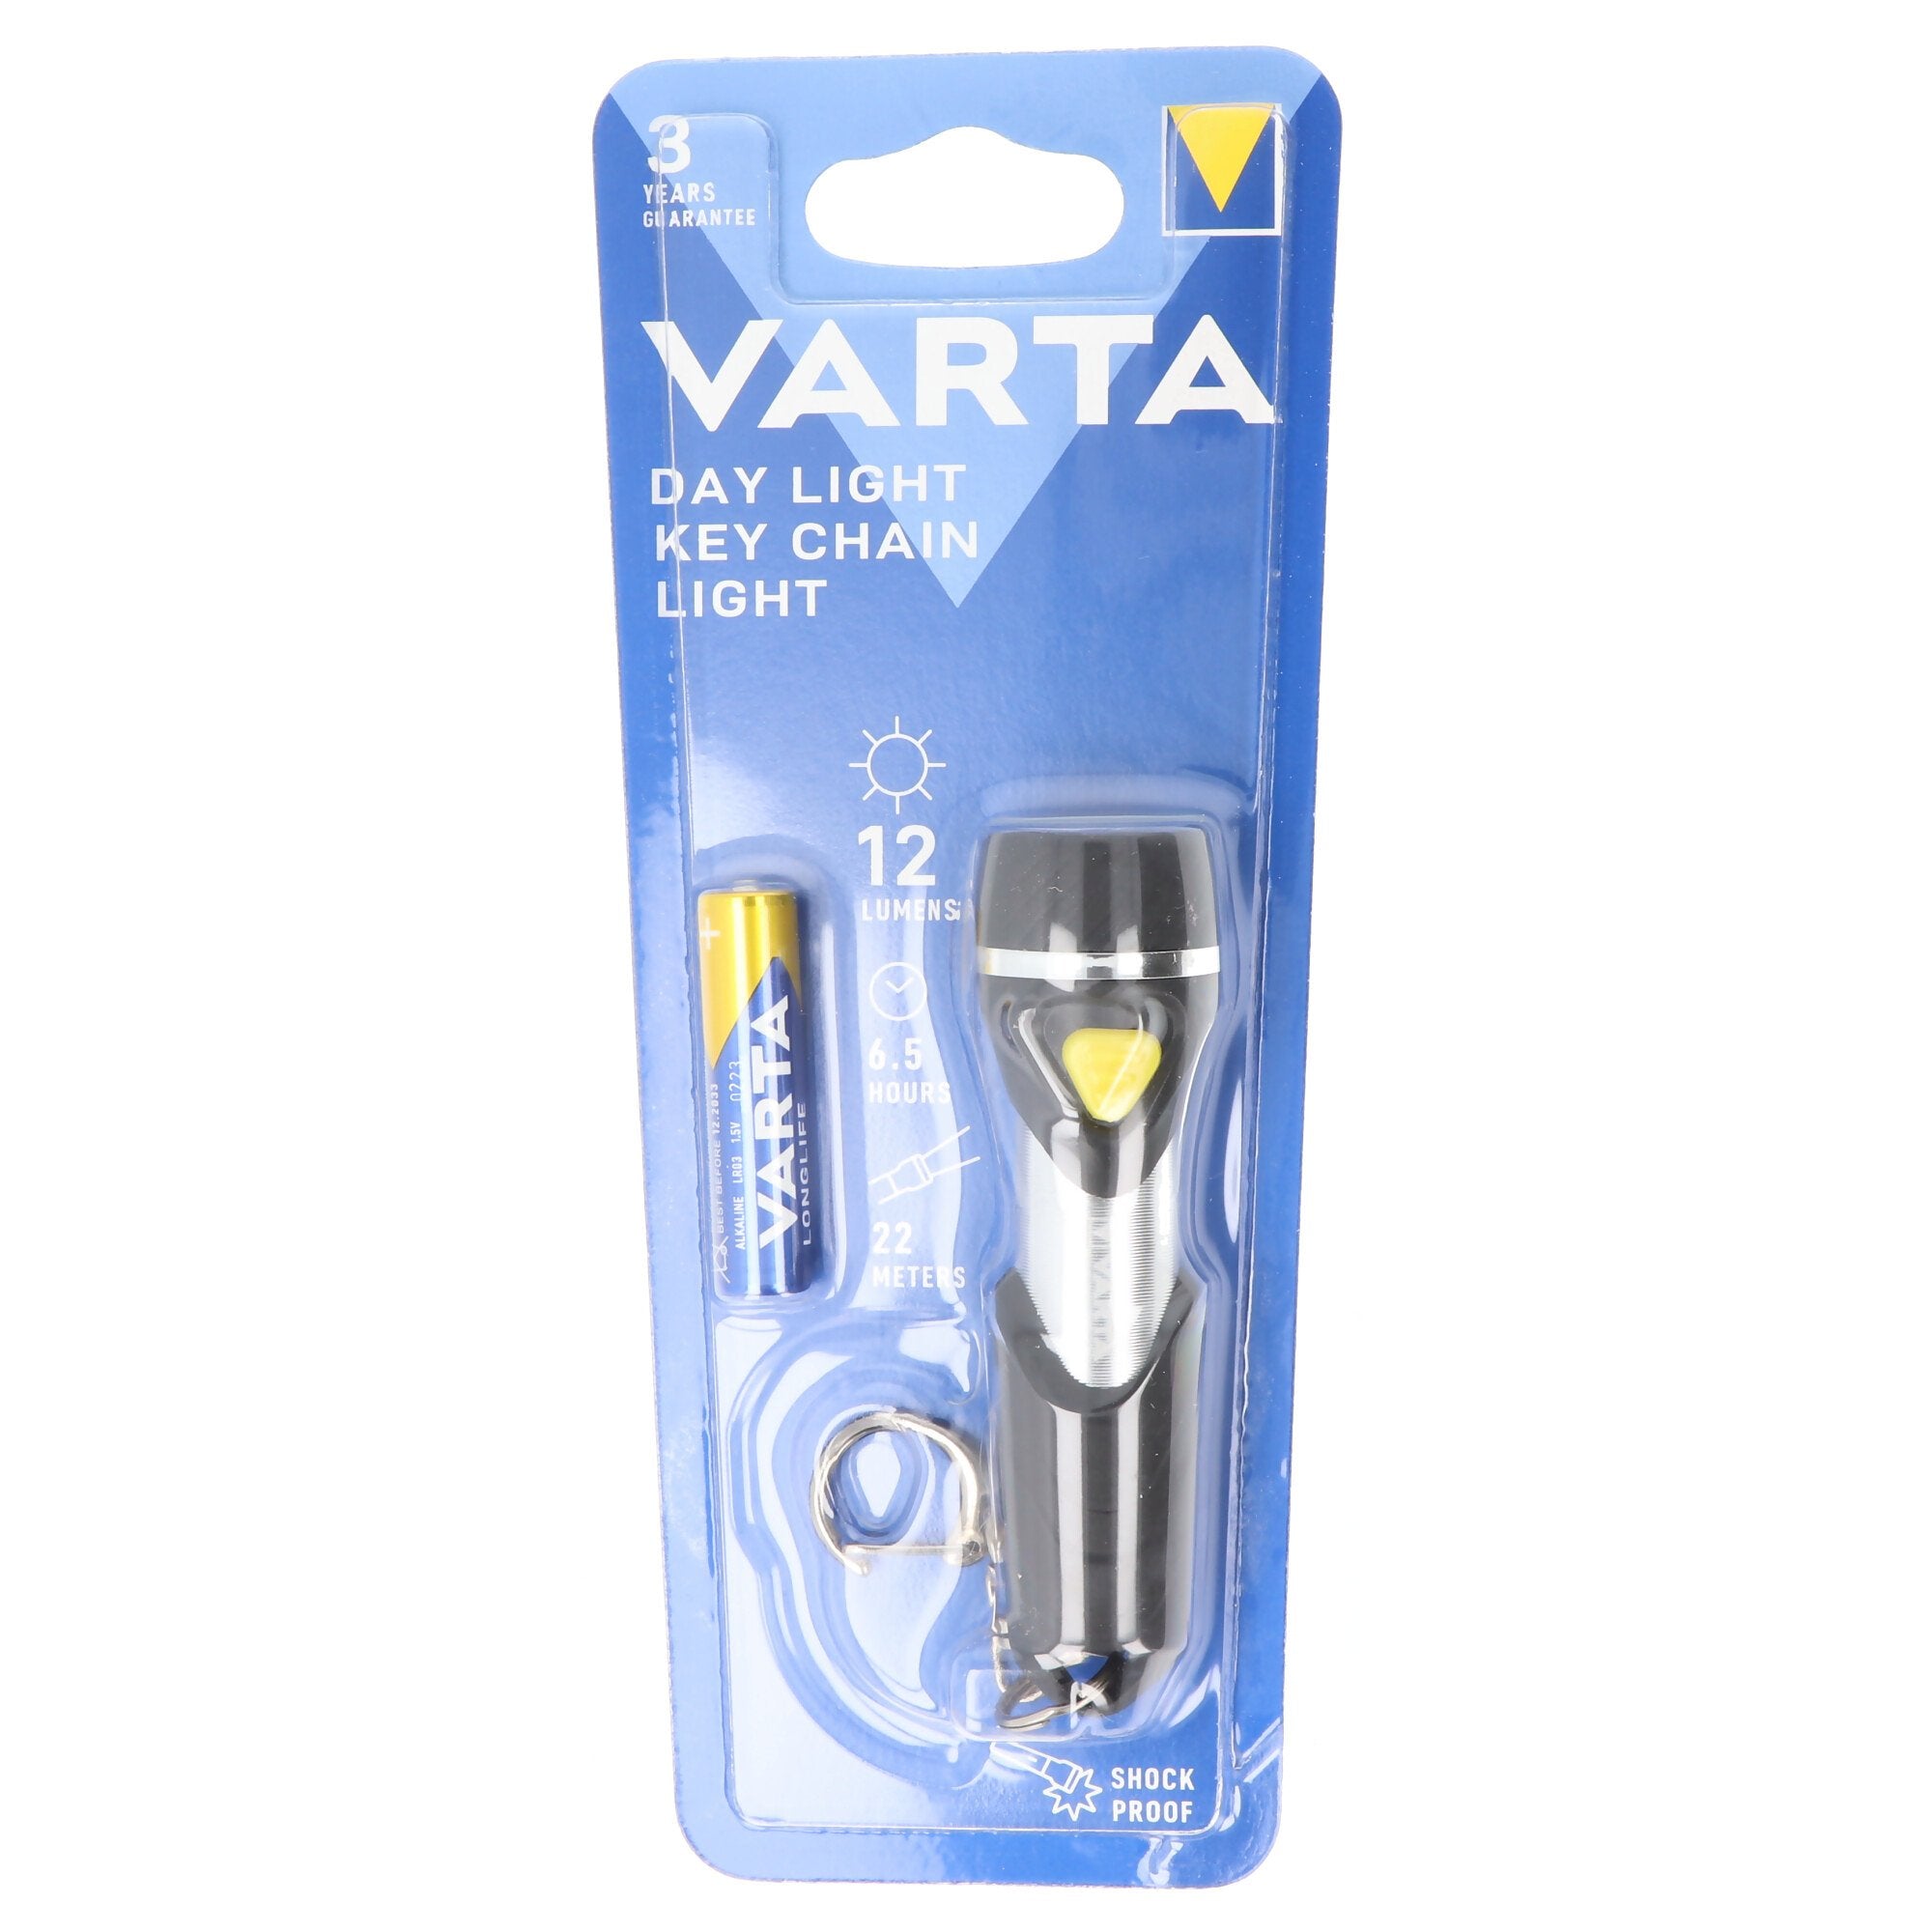 Varta LED torch Day Light, key chain 12lm, incl. 1x alkaline AAA battery, retail blister